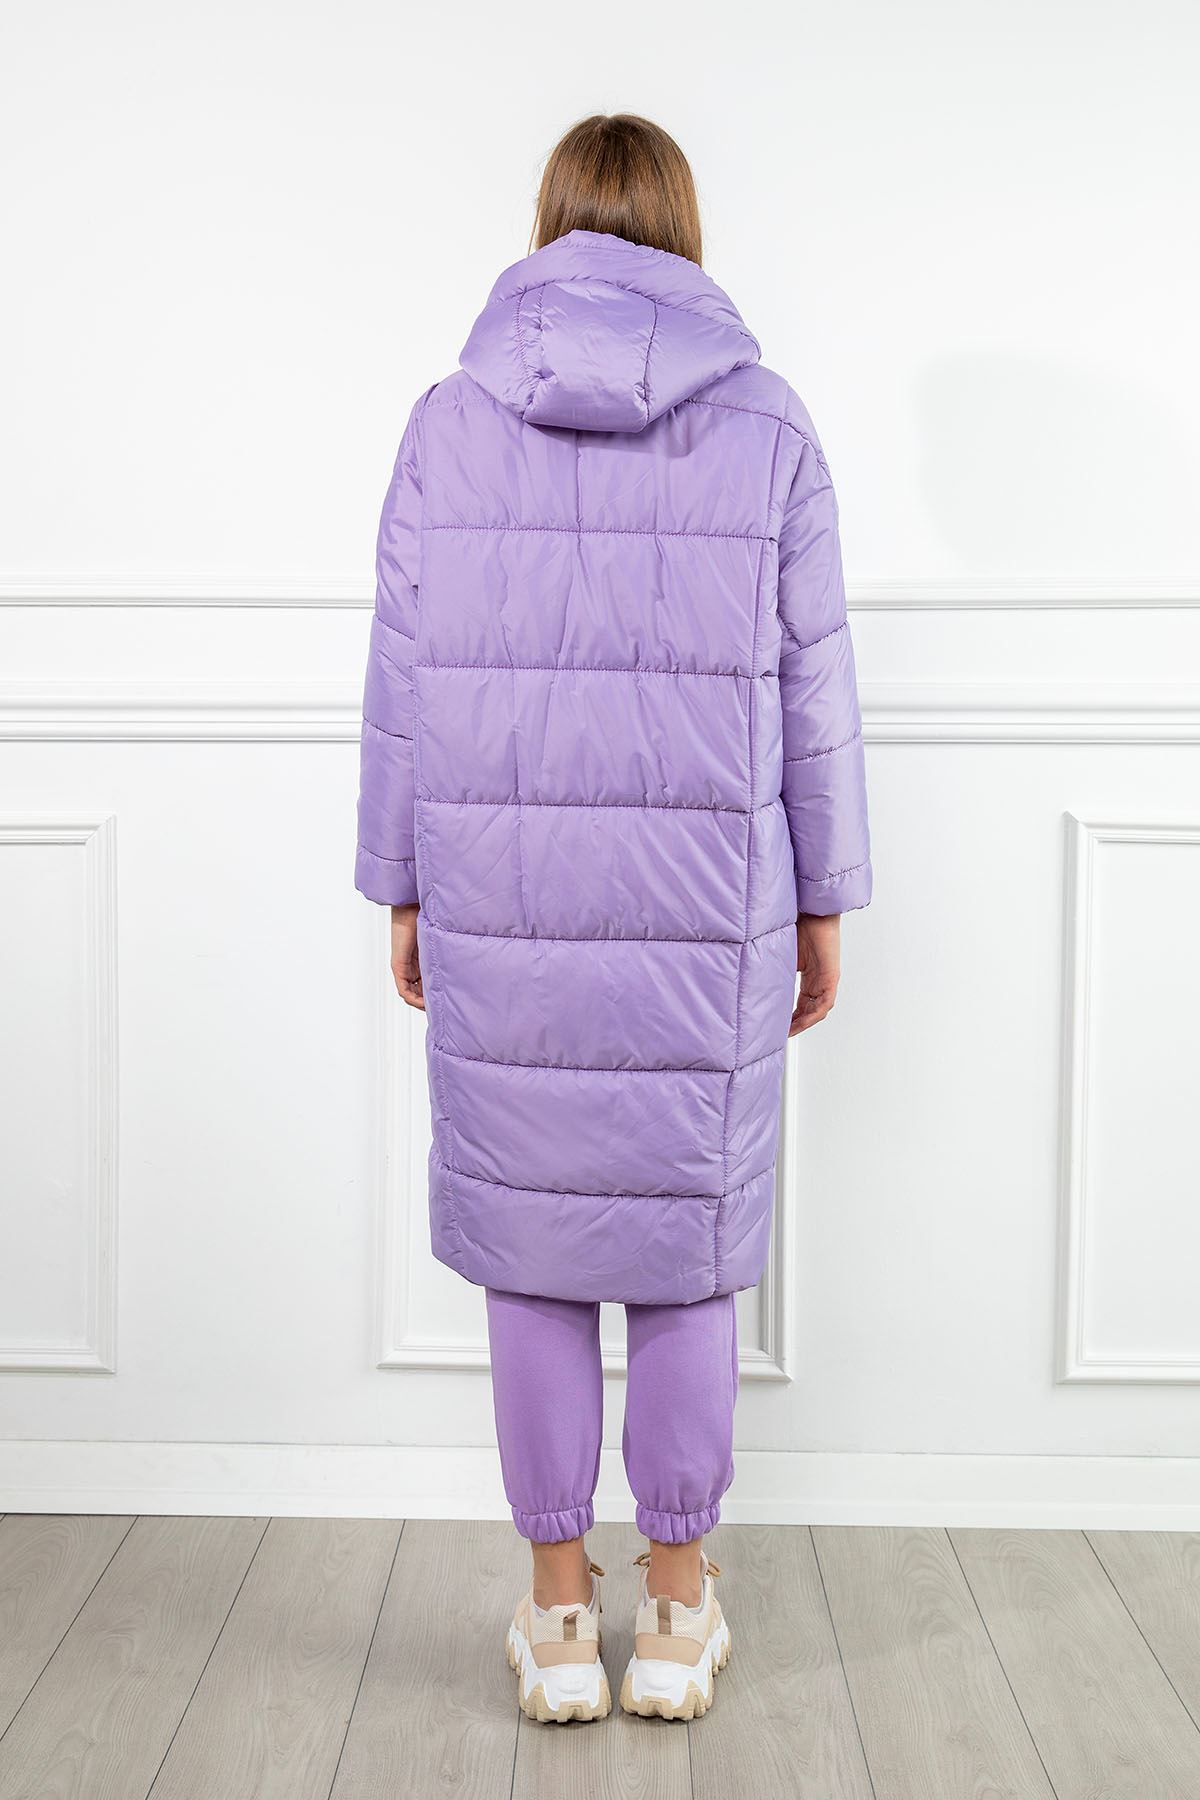 Quilted Fabric Long Sleeve Hooded Below The Knees Boyfriend Women Coat - Lilac